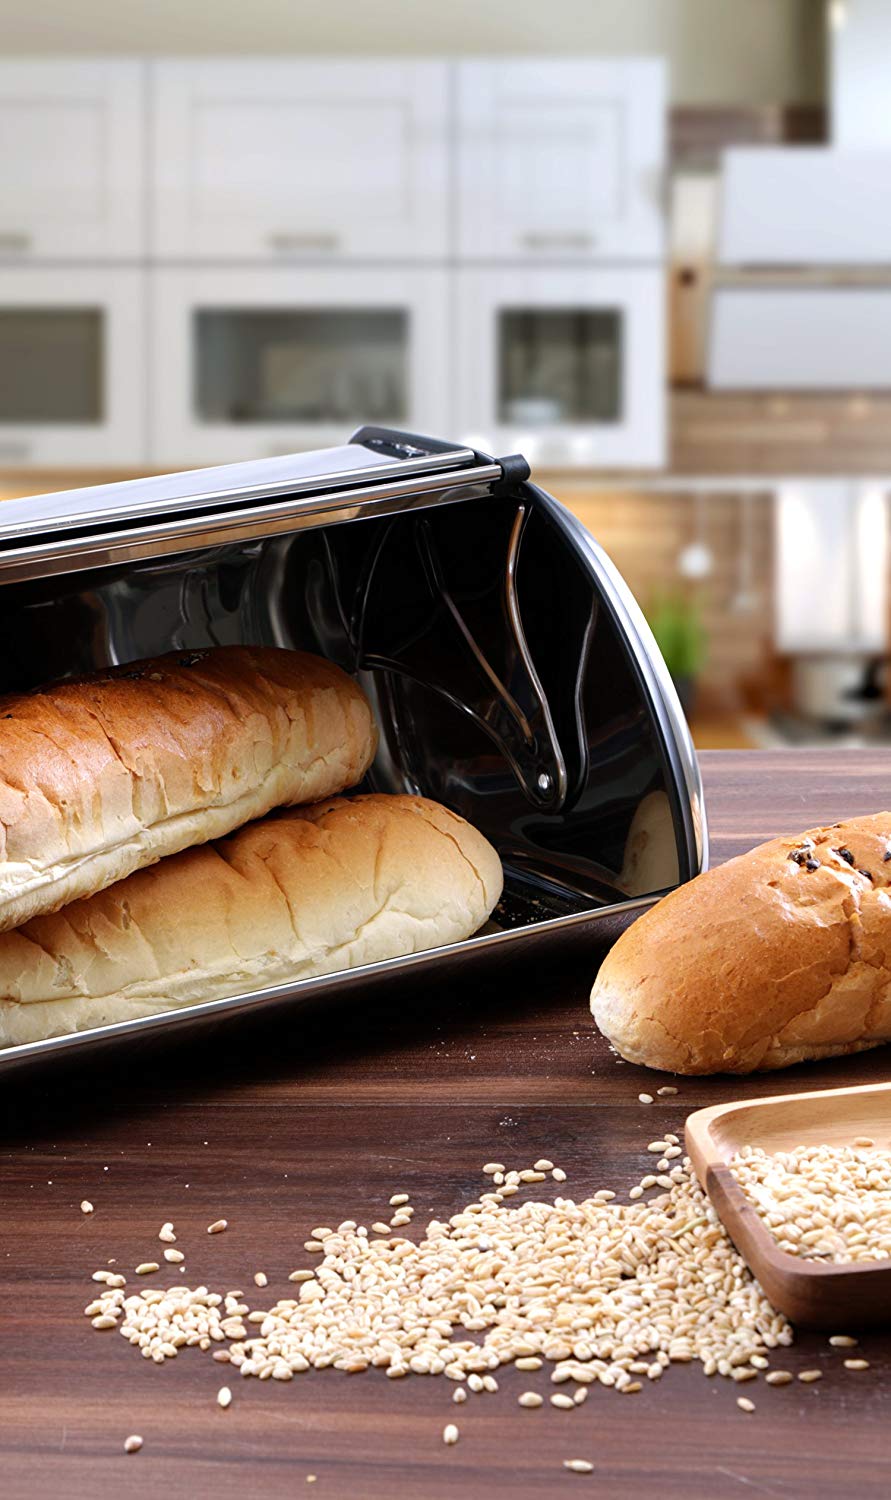  Utopia Kitchen - Bread Box For Kitchen Countertops - Bread  Holder Or Bread Container For All Sizes Of Breads - Pack Of 1 Bread Storage  Container